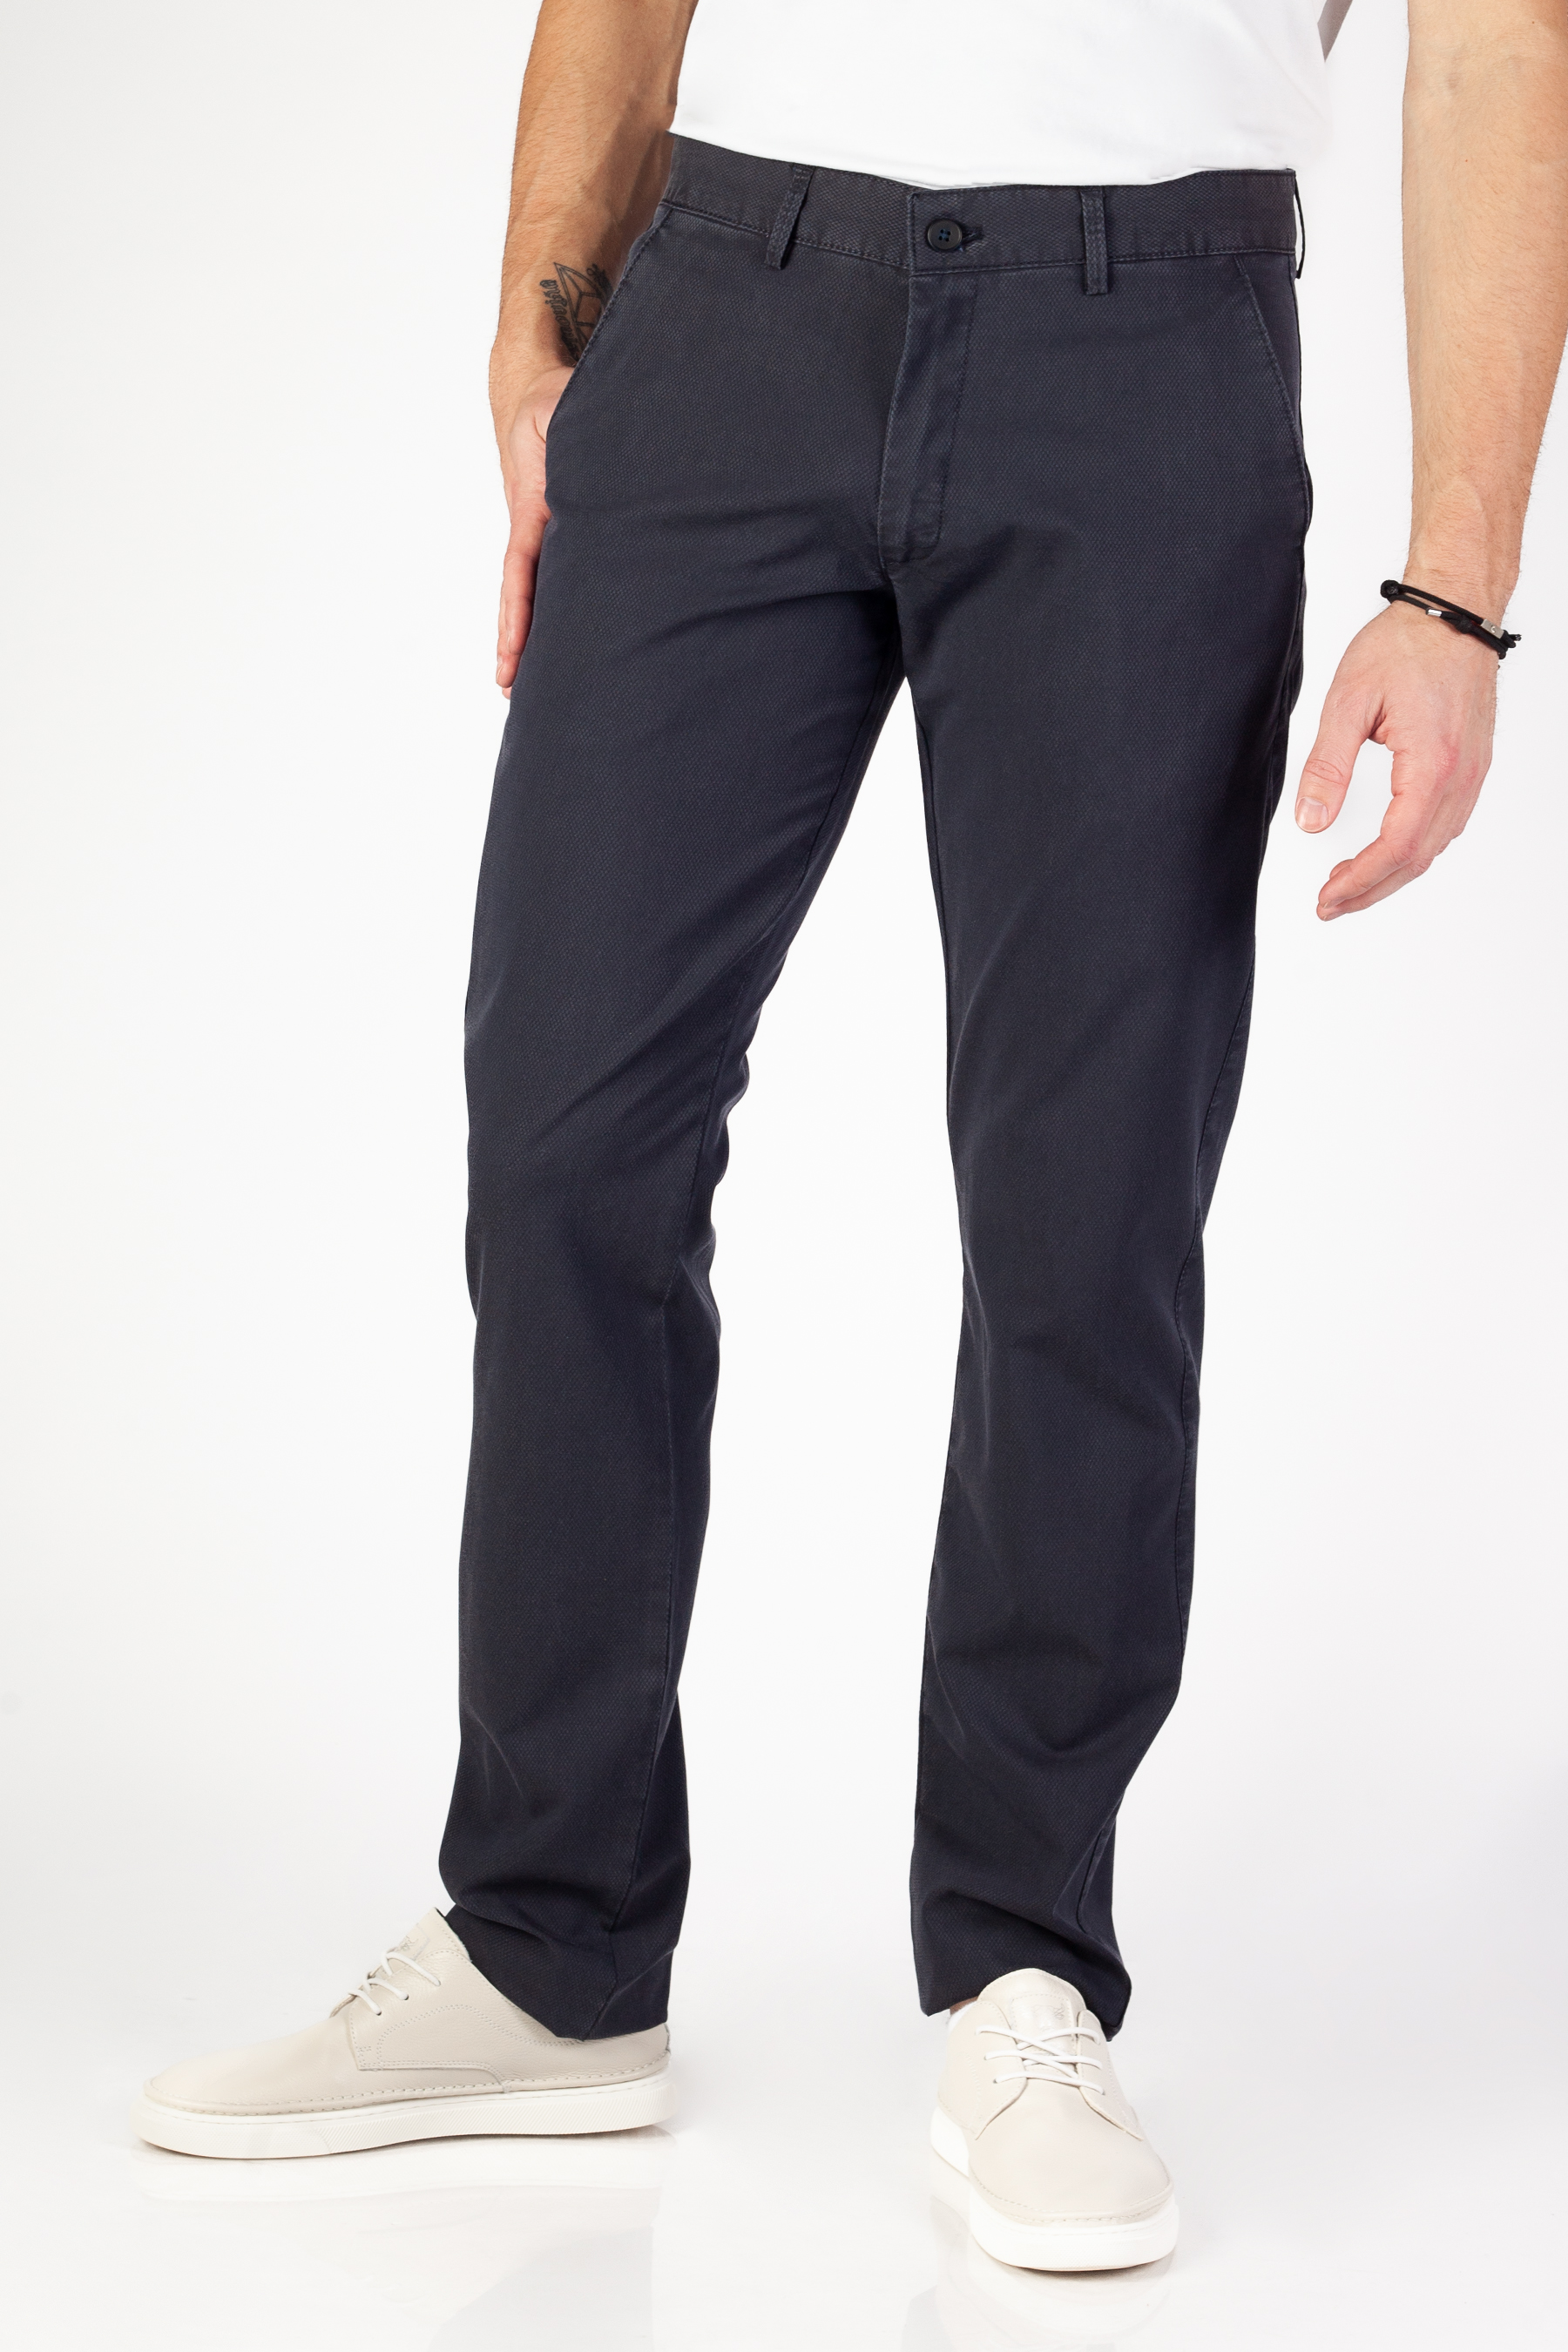 Chino pants BLK JEANS 8375-5133-104-206